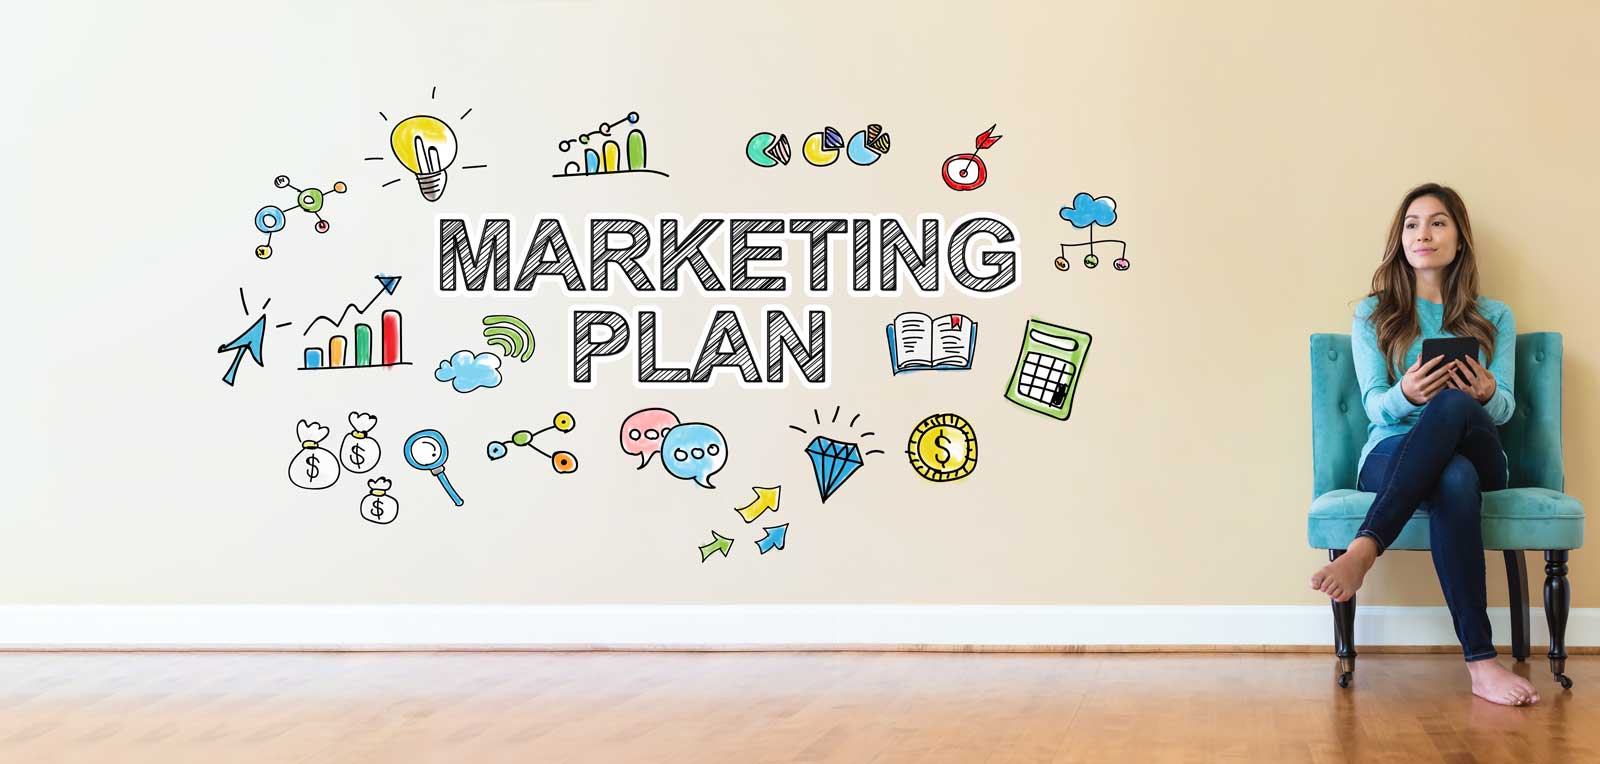 Big Marketing for Small Business: Planning